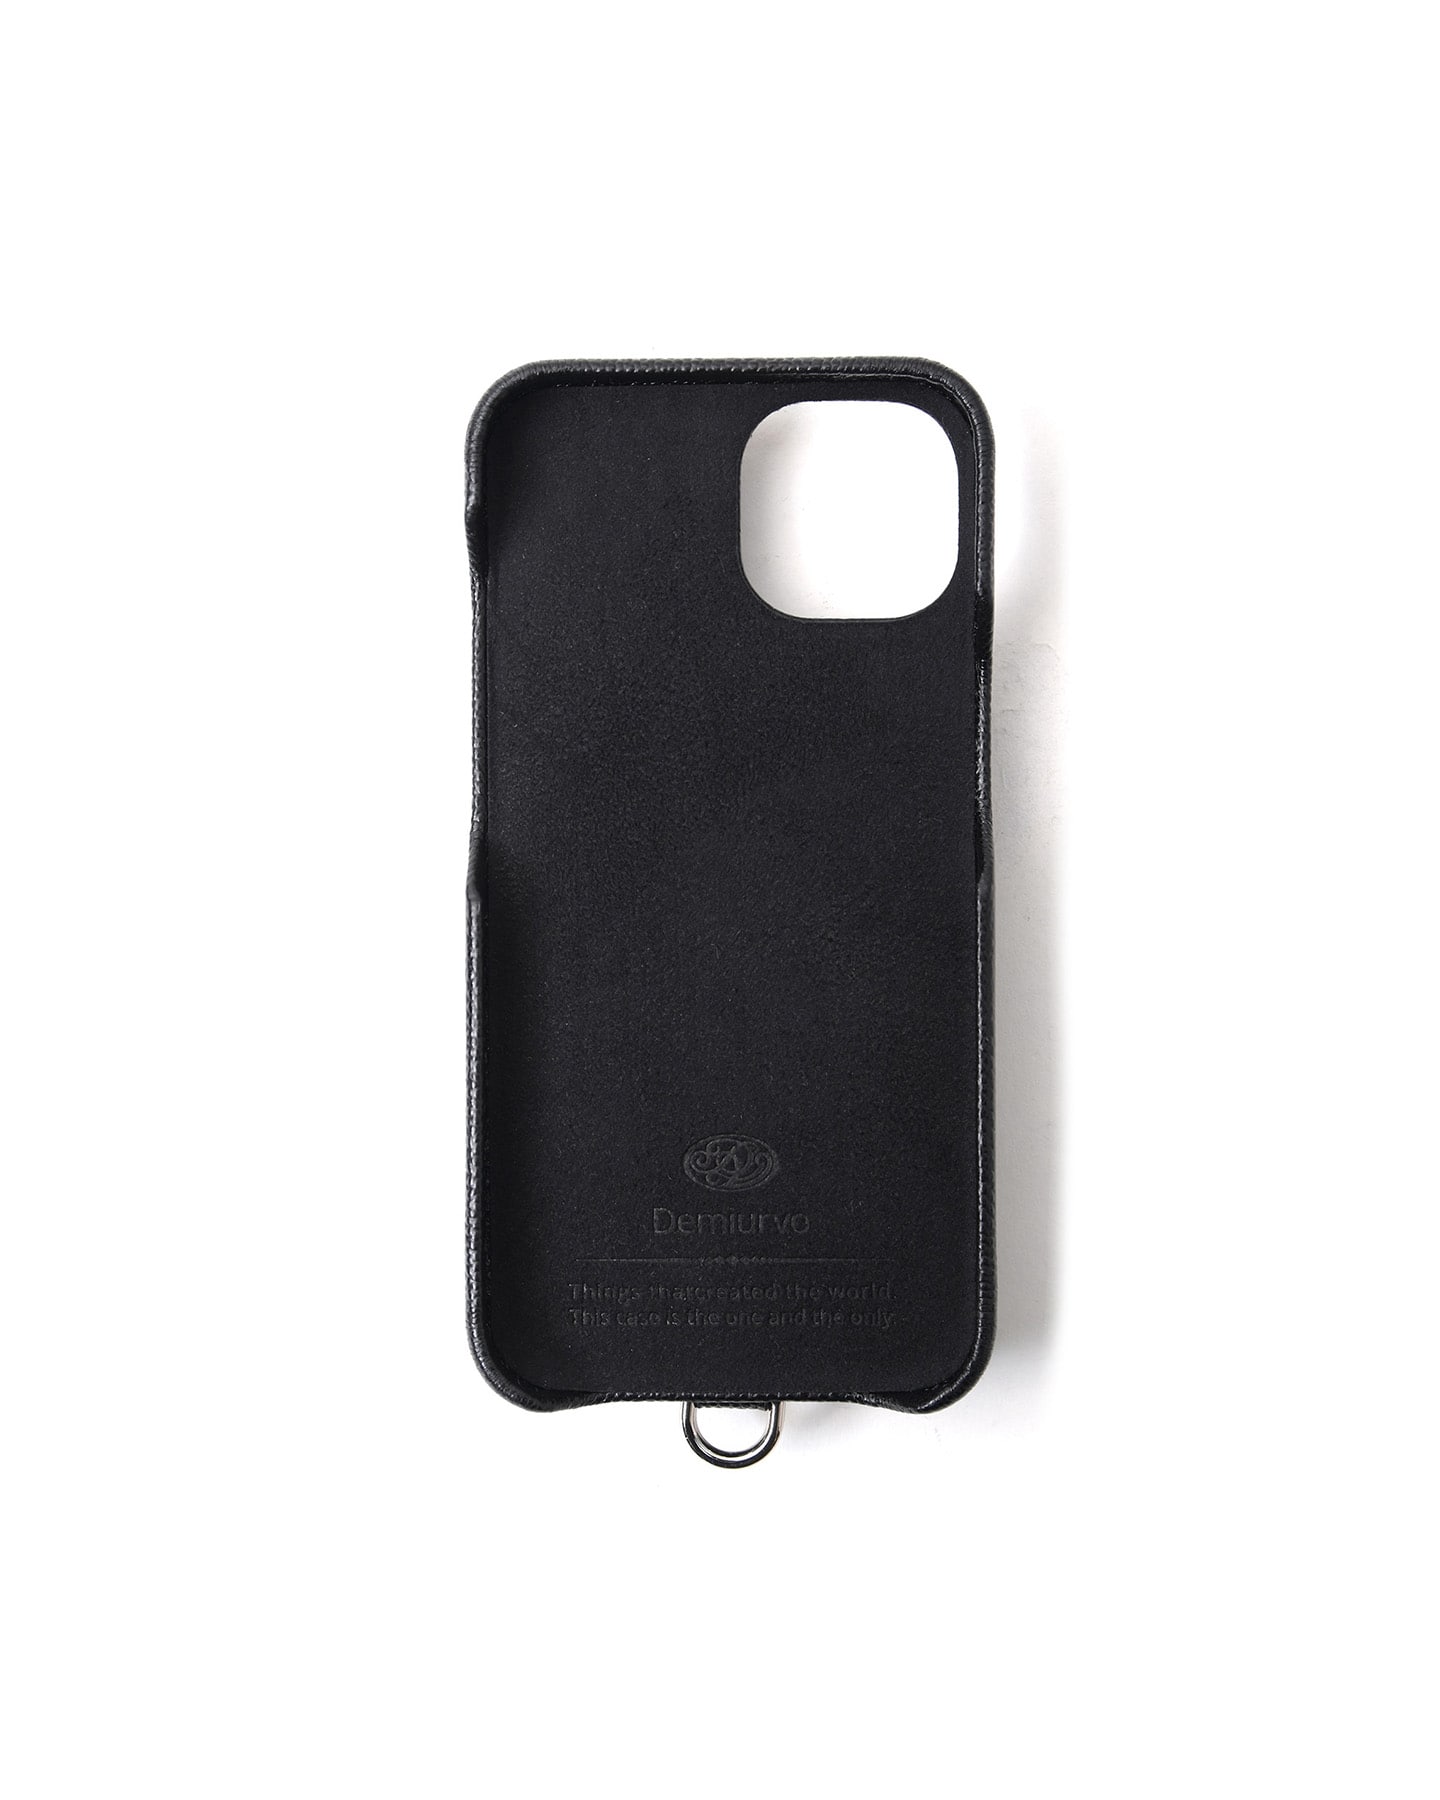 SOPH. | DEMIURVO LEATHER QUILTING PHONE CASE for iPhone(FREE A (I